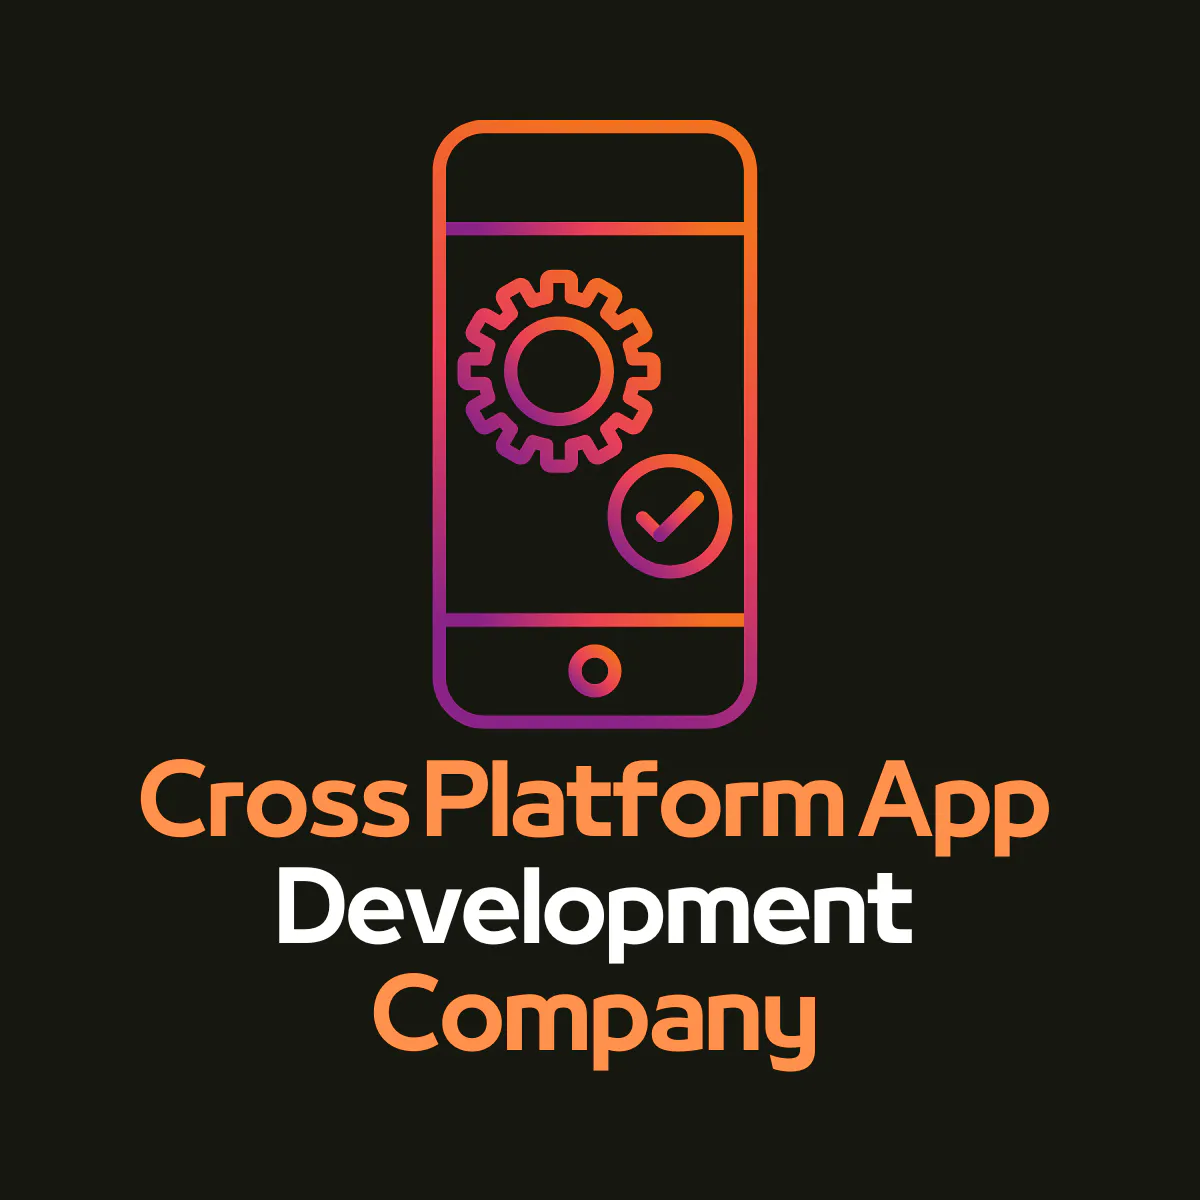 Build Cross-Platform Apps That Reach More Users